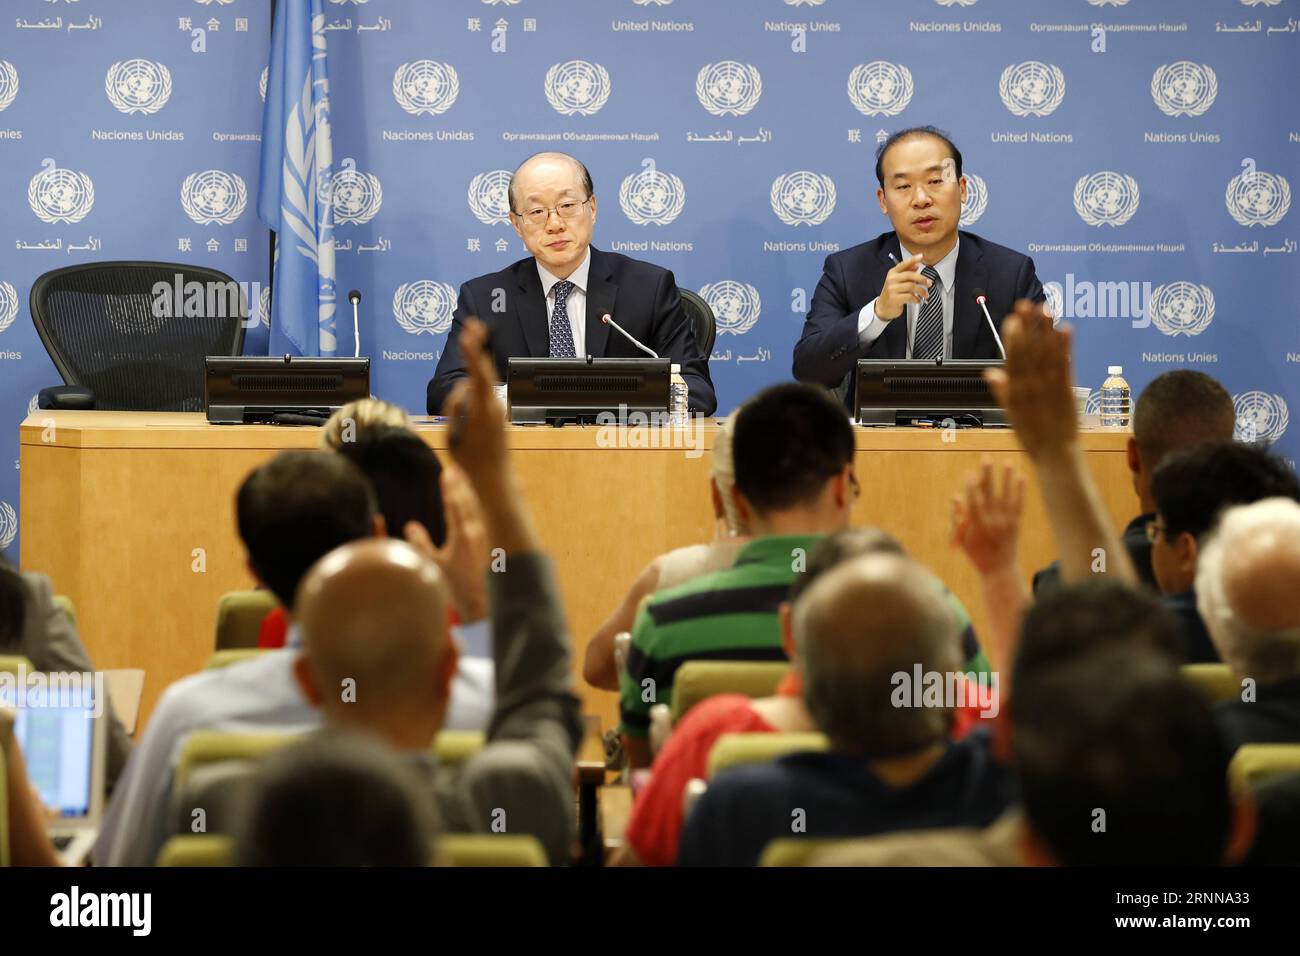 (170704) -- UNITED NATIONS, July 4, 2017 -- Liu Jieyi (L), China s permanent representative to the Unite Nations and UN Security Council president for July, attends a press conference at the UN headquarters, July 4, 2017. Ambassador Liu Jieyi of China, UN Security Council president for July, said on Monday that issues of Syria, Yemen, South Sudan, Colombia, Haiti and Cyprus will be on the agenda of the 15-nation council in July. )(gj) UN-SECURITY COUNCIL-LIU JIEYI-PRESS CONFERENCE LixMuzi PUBLICATIONxNOTxINxCHN   United Nations July 4 2017 Liu Jieyi l China S permanently Representative to The Stock Photo